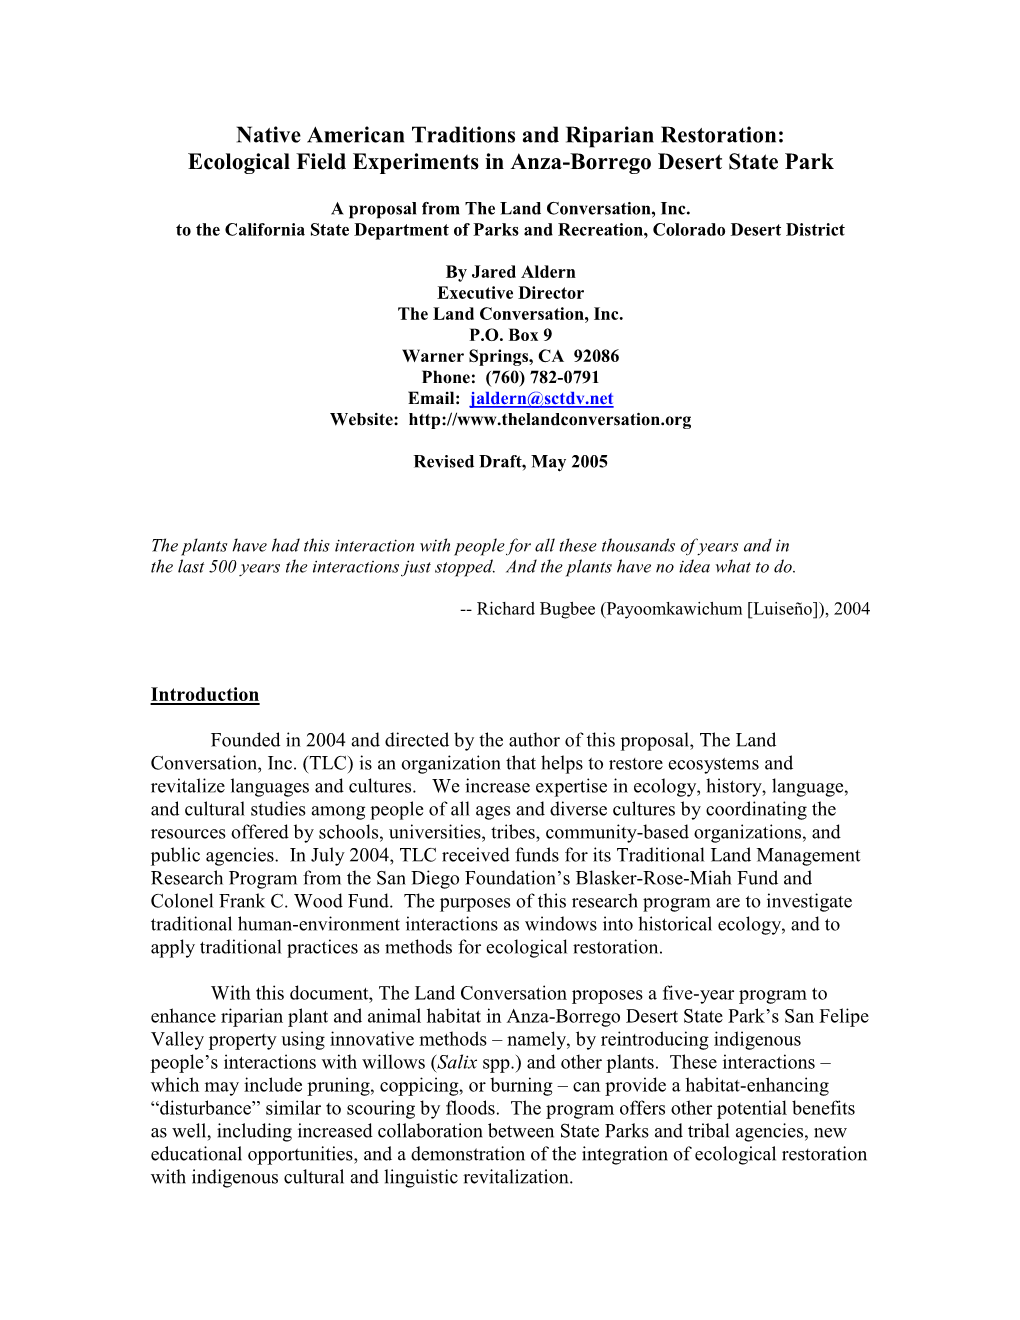 Ecological Field Experiments in Sentenac Cienega Area Anza-Borrego Desert State Park Proposed by Jared Aldern, the Land Conversation, Inc